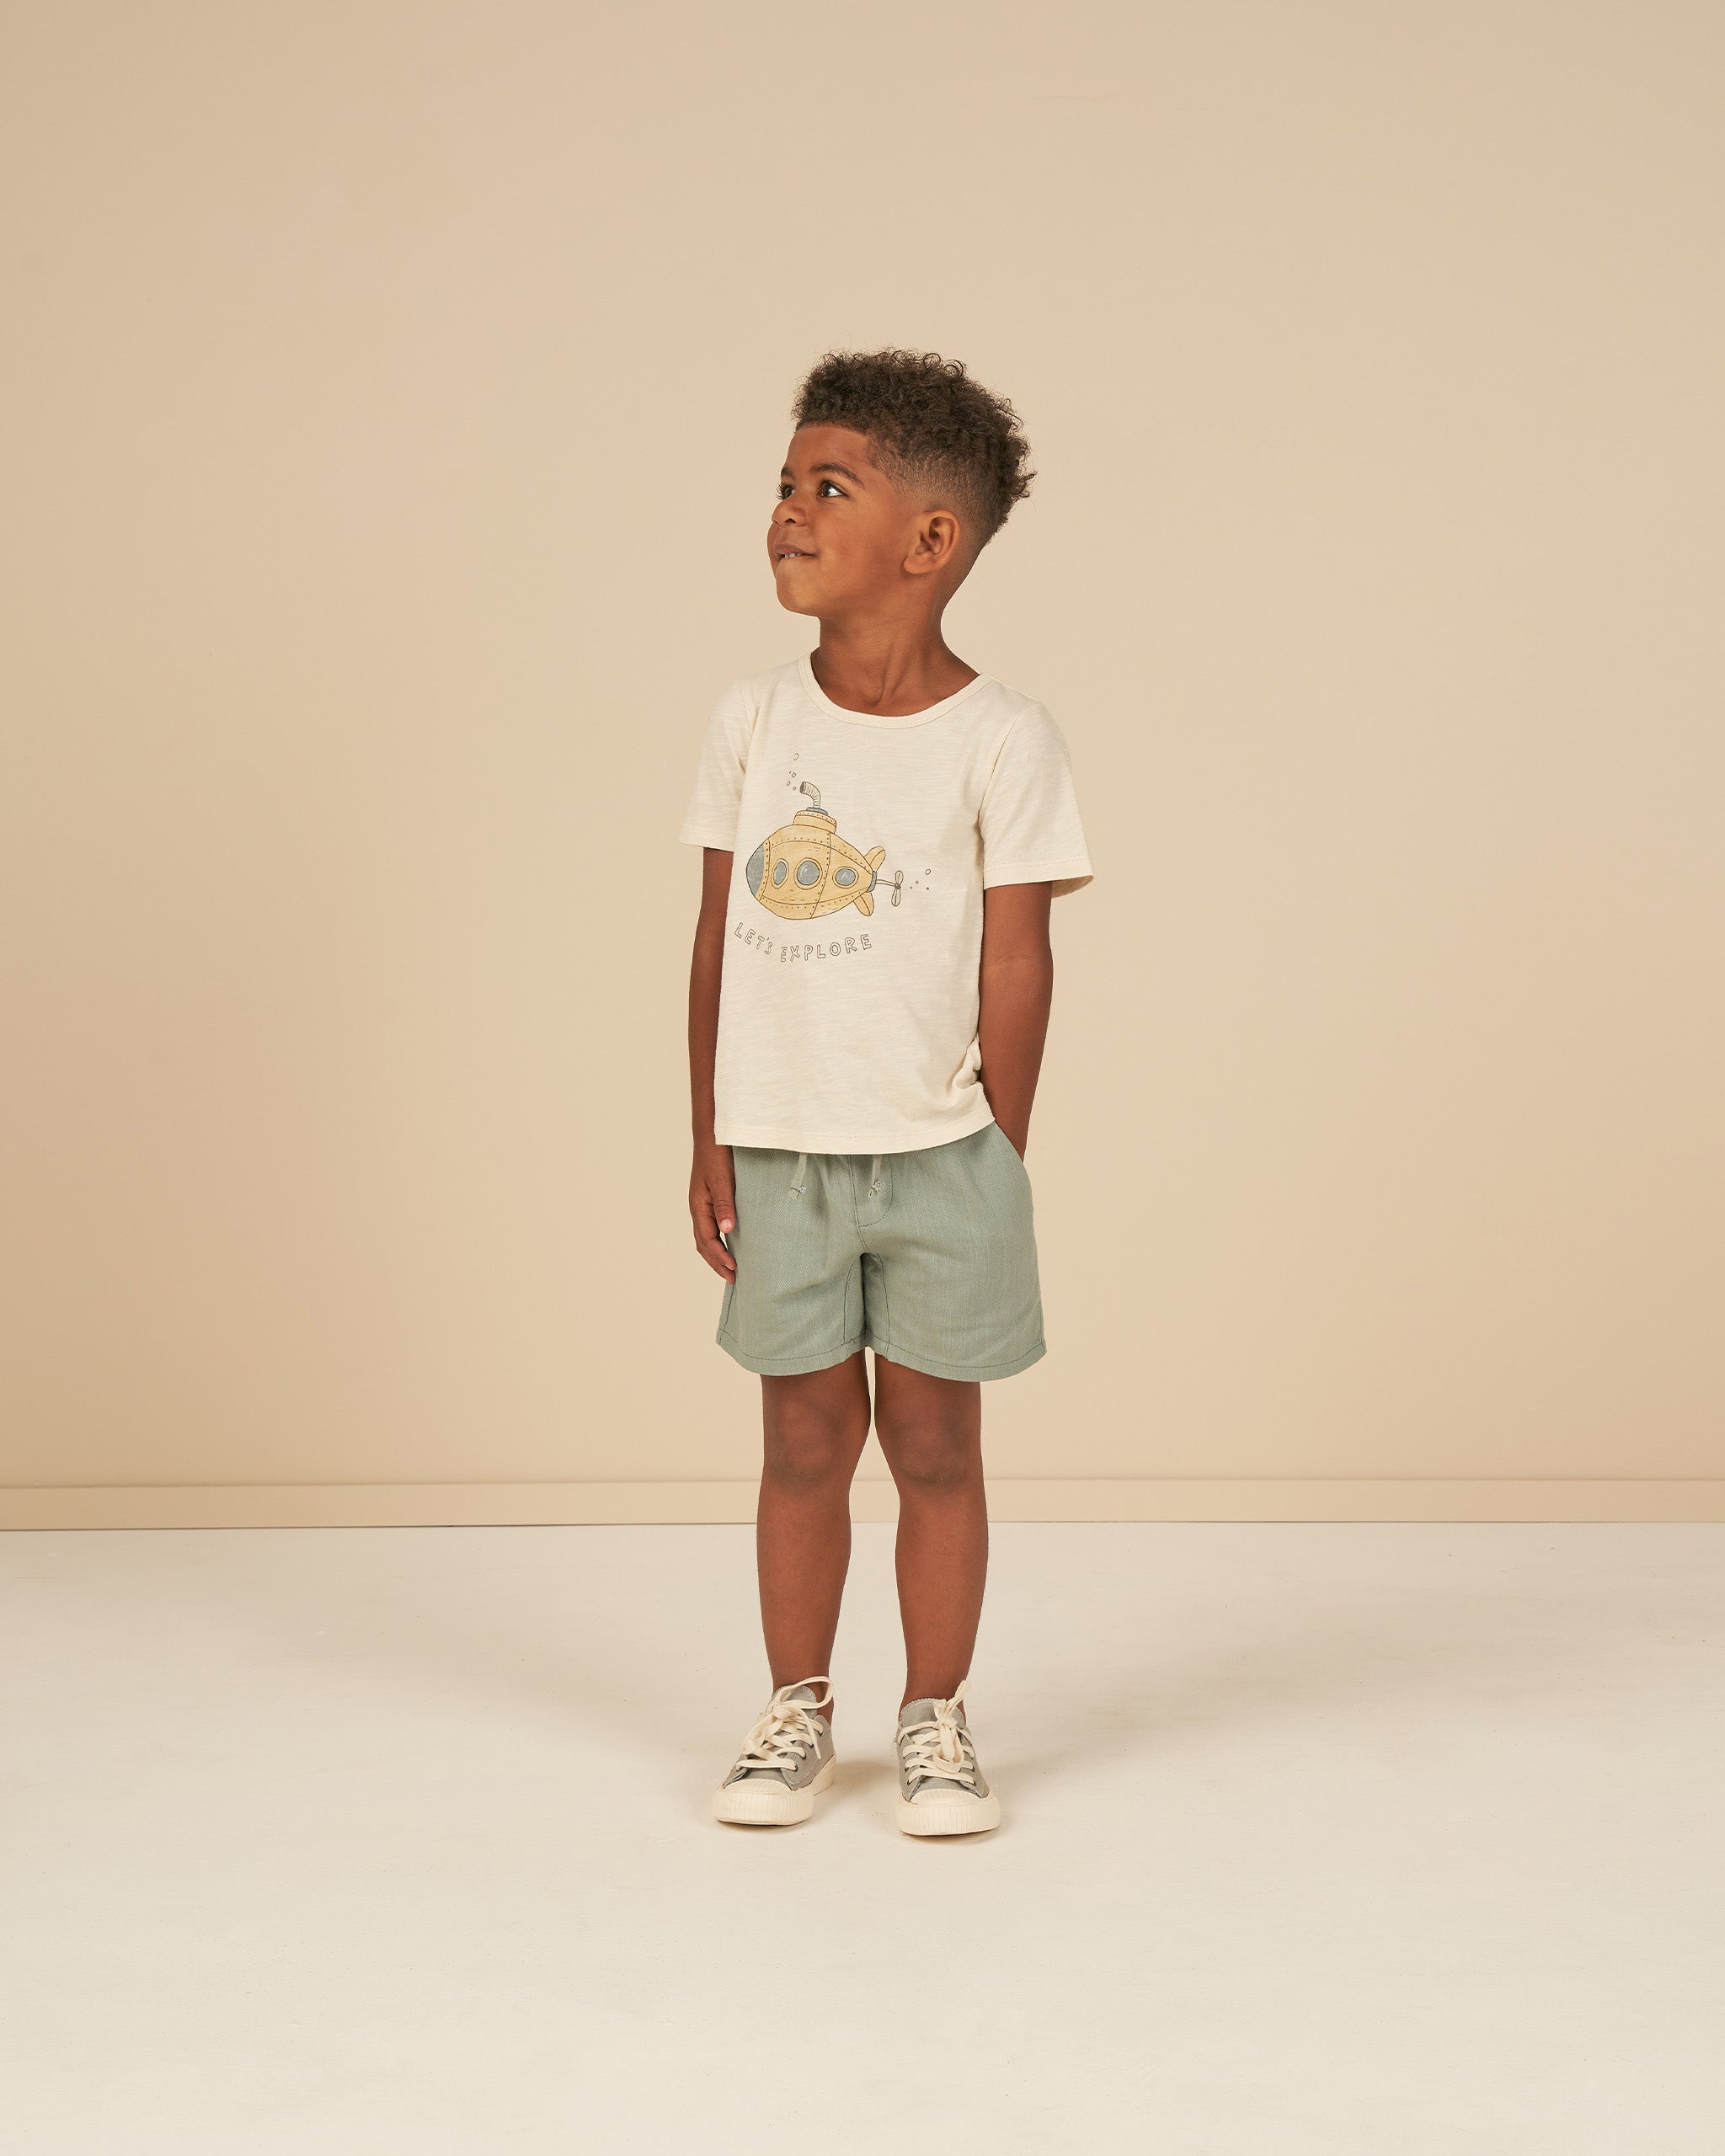 Basic Tee || Let's Explore - Rylee + Cru | Kids Clothes | Trendy Baby Clothes | Modern Infant Outfits |